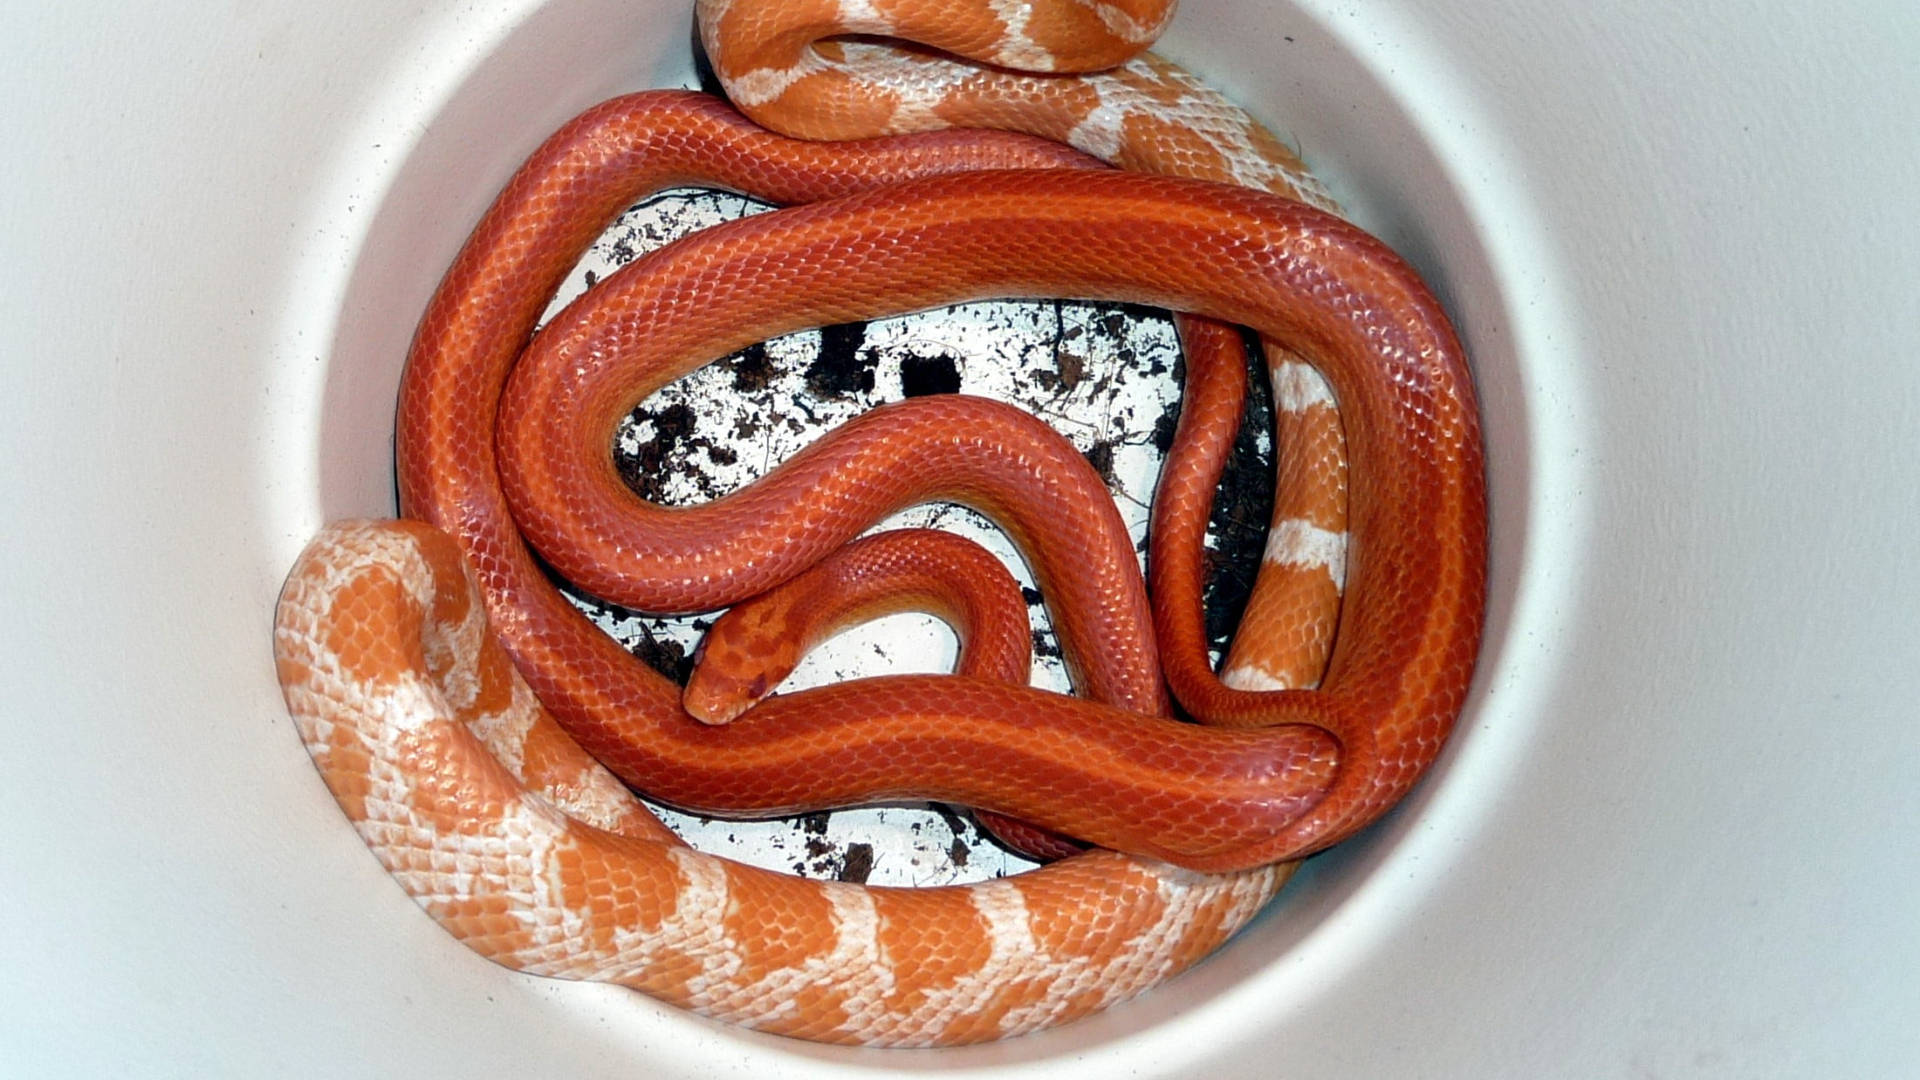 Corn Snakes In A Bowl Wallpaper